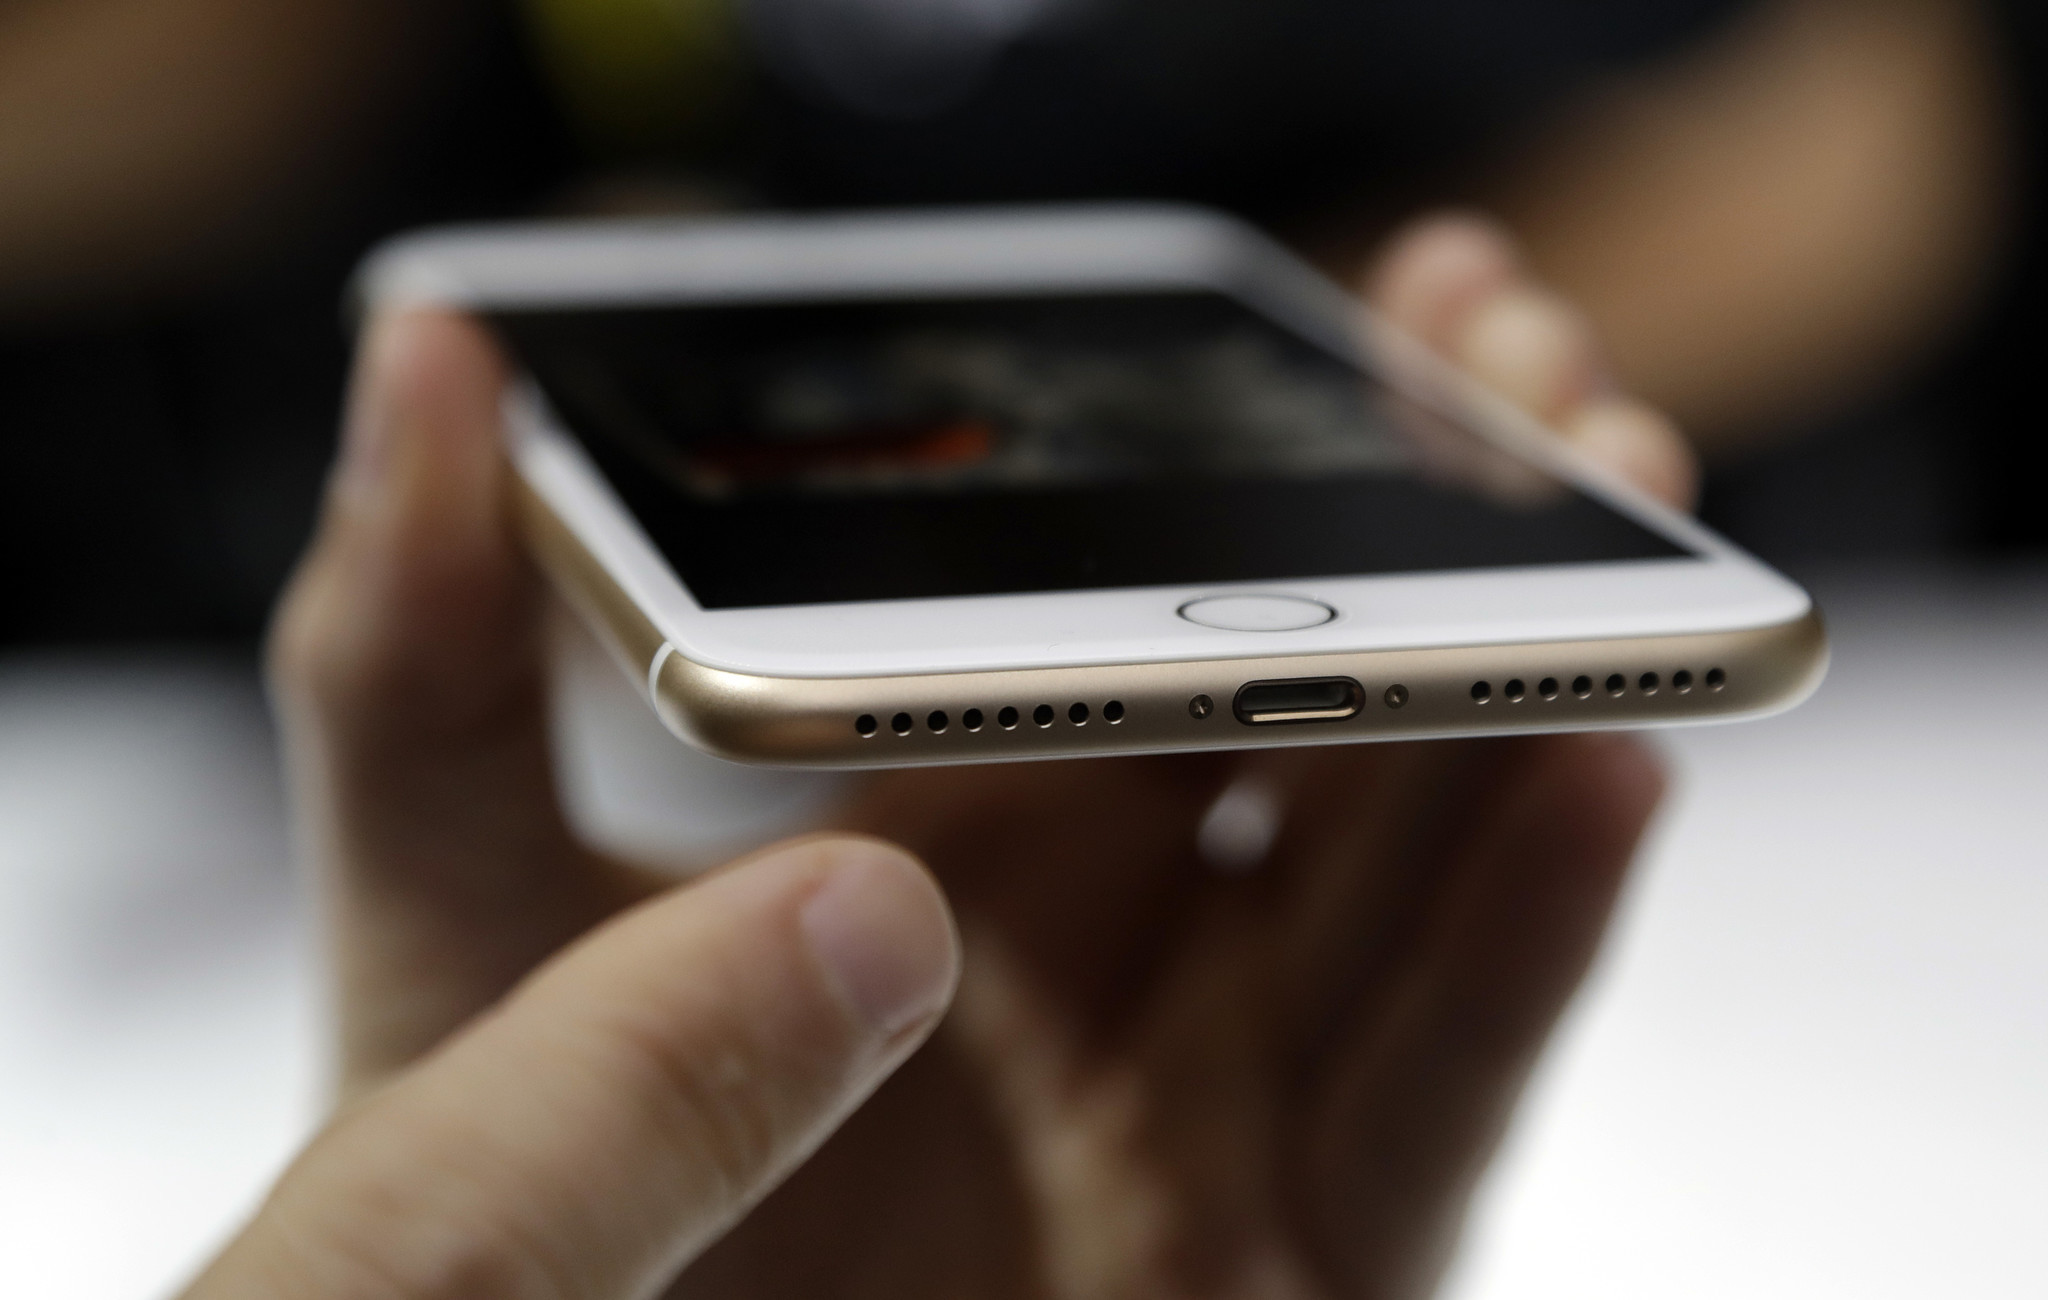 The new iPhone will use the lightning port for both charging and listening. (Marcio Jose Sanchez/Associated Press)